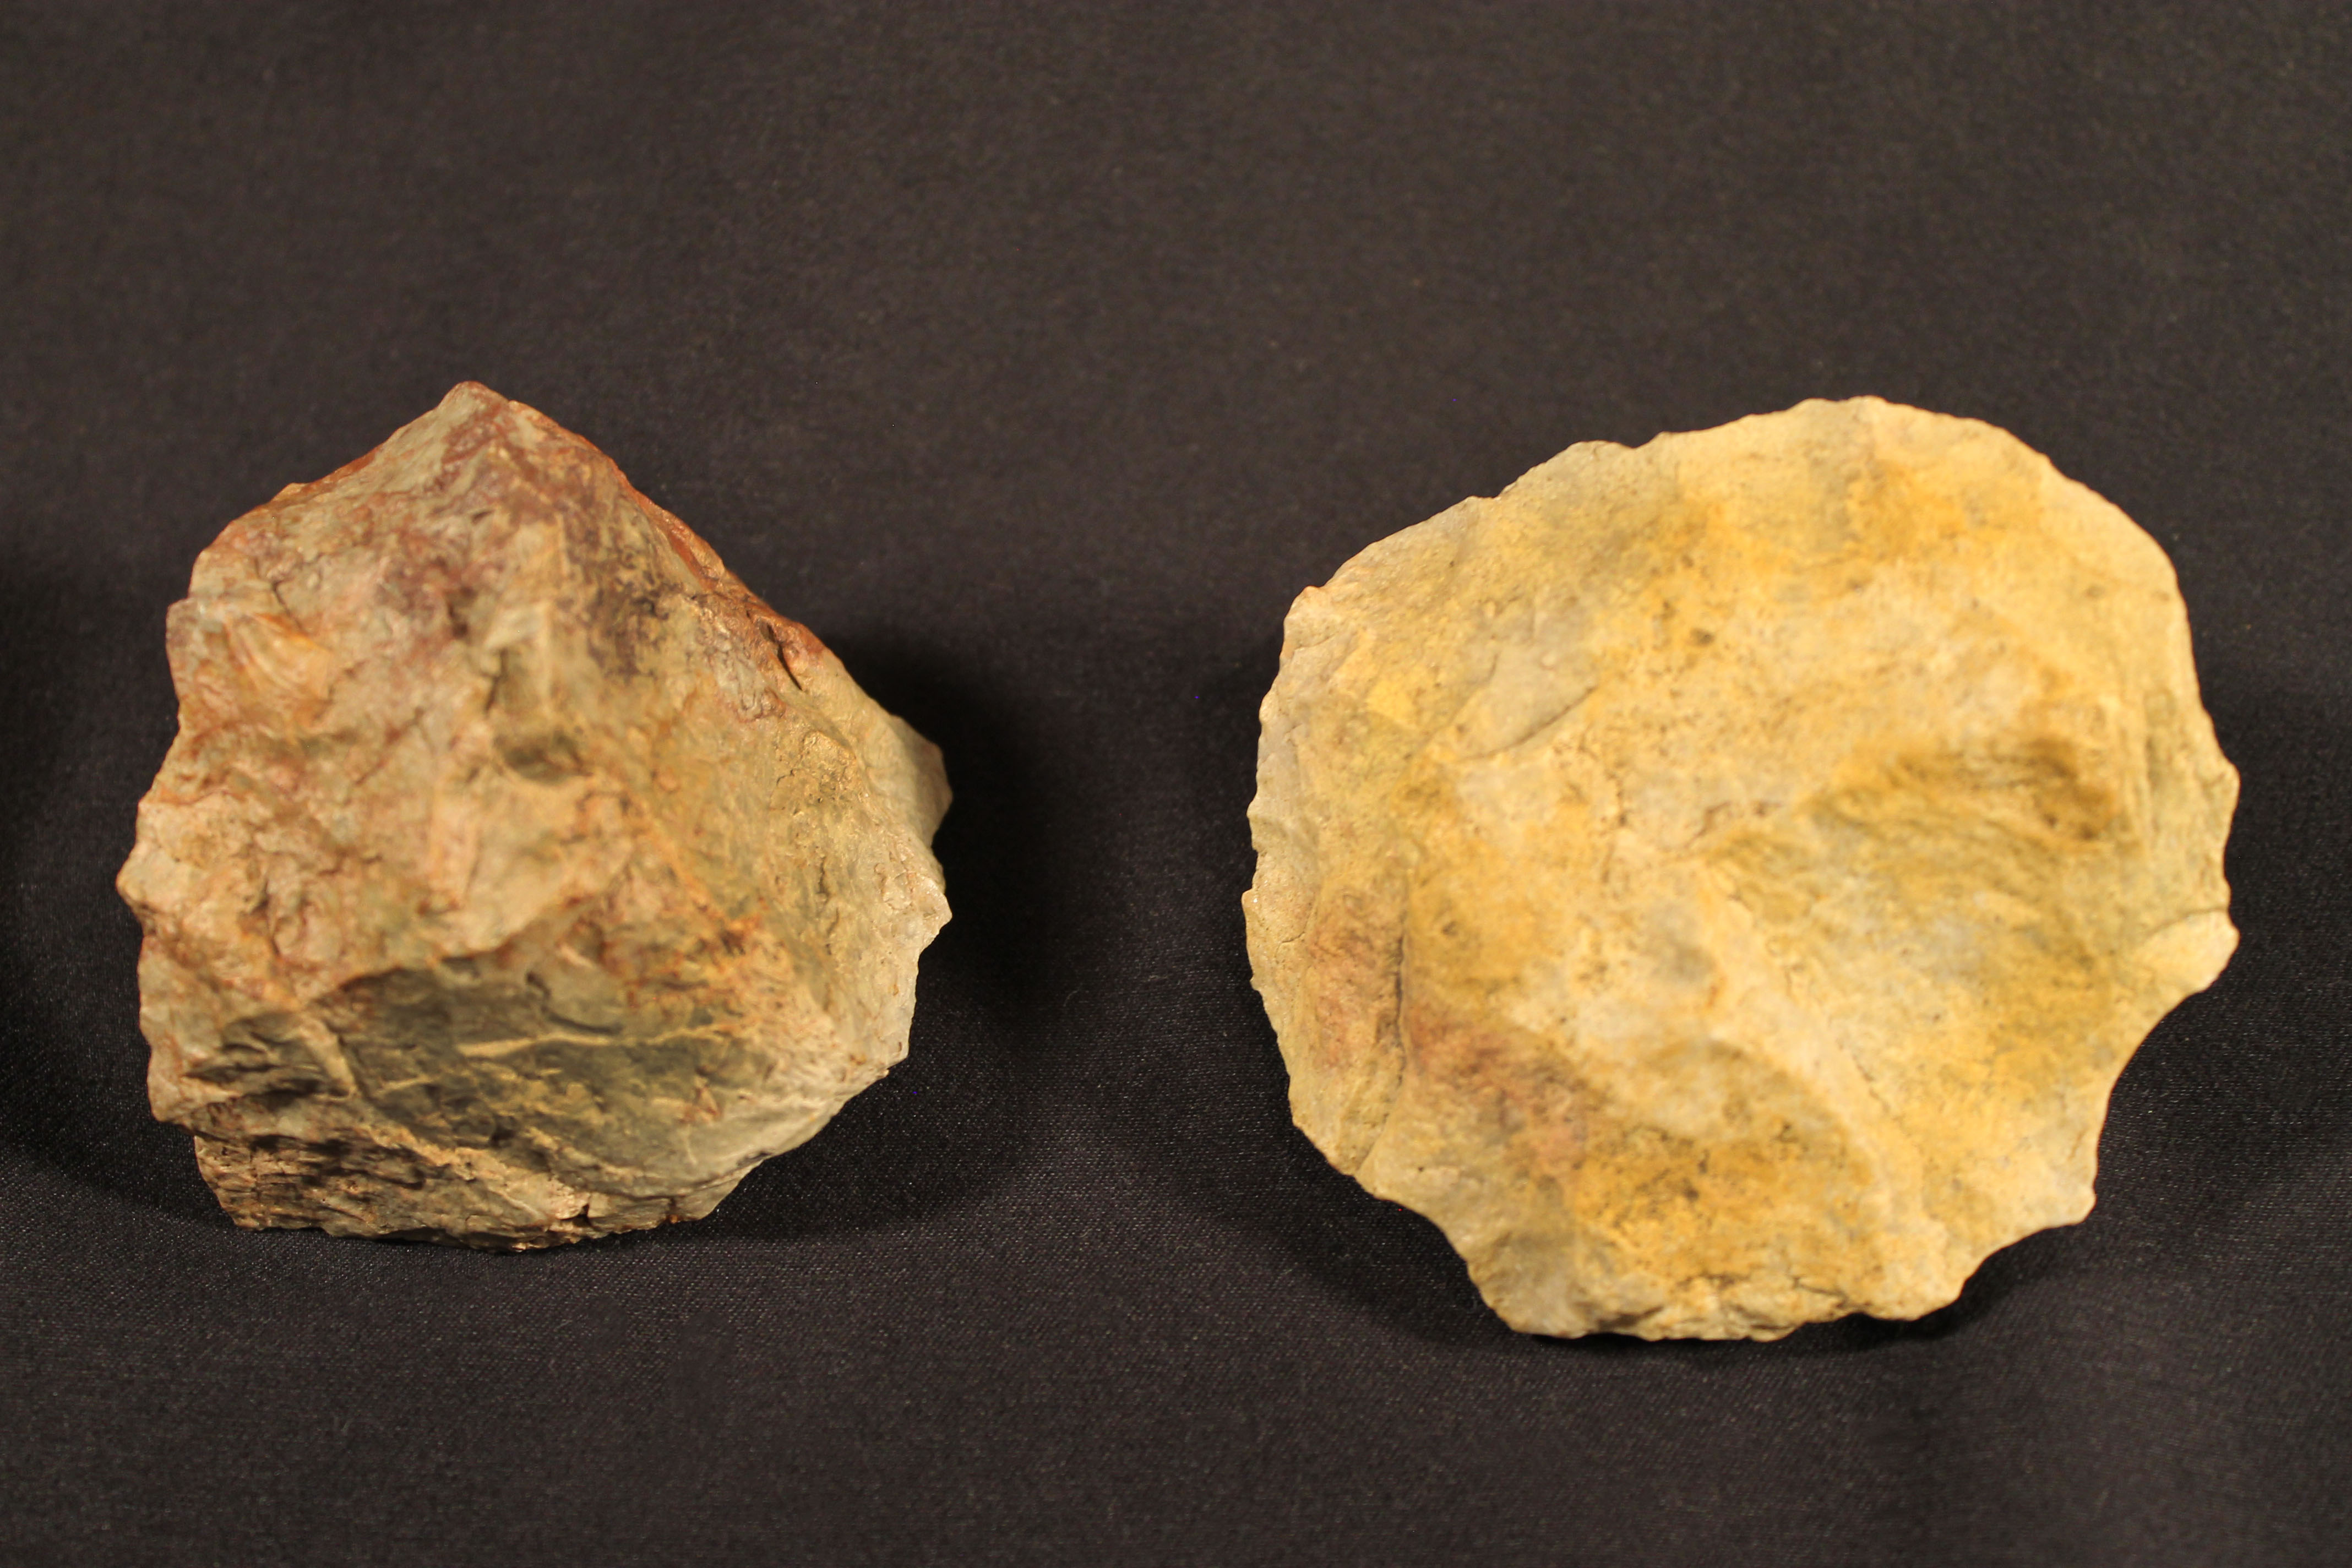 Two stones from which fragments have been removed